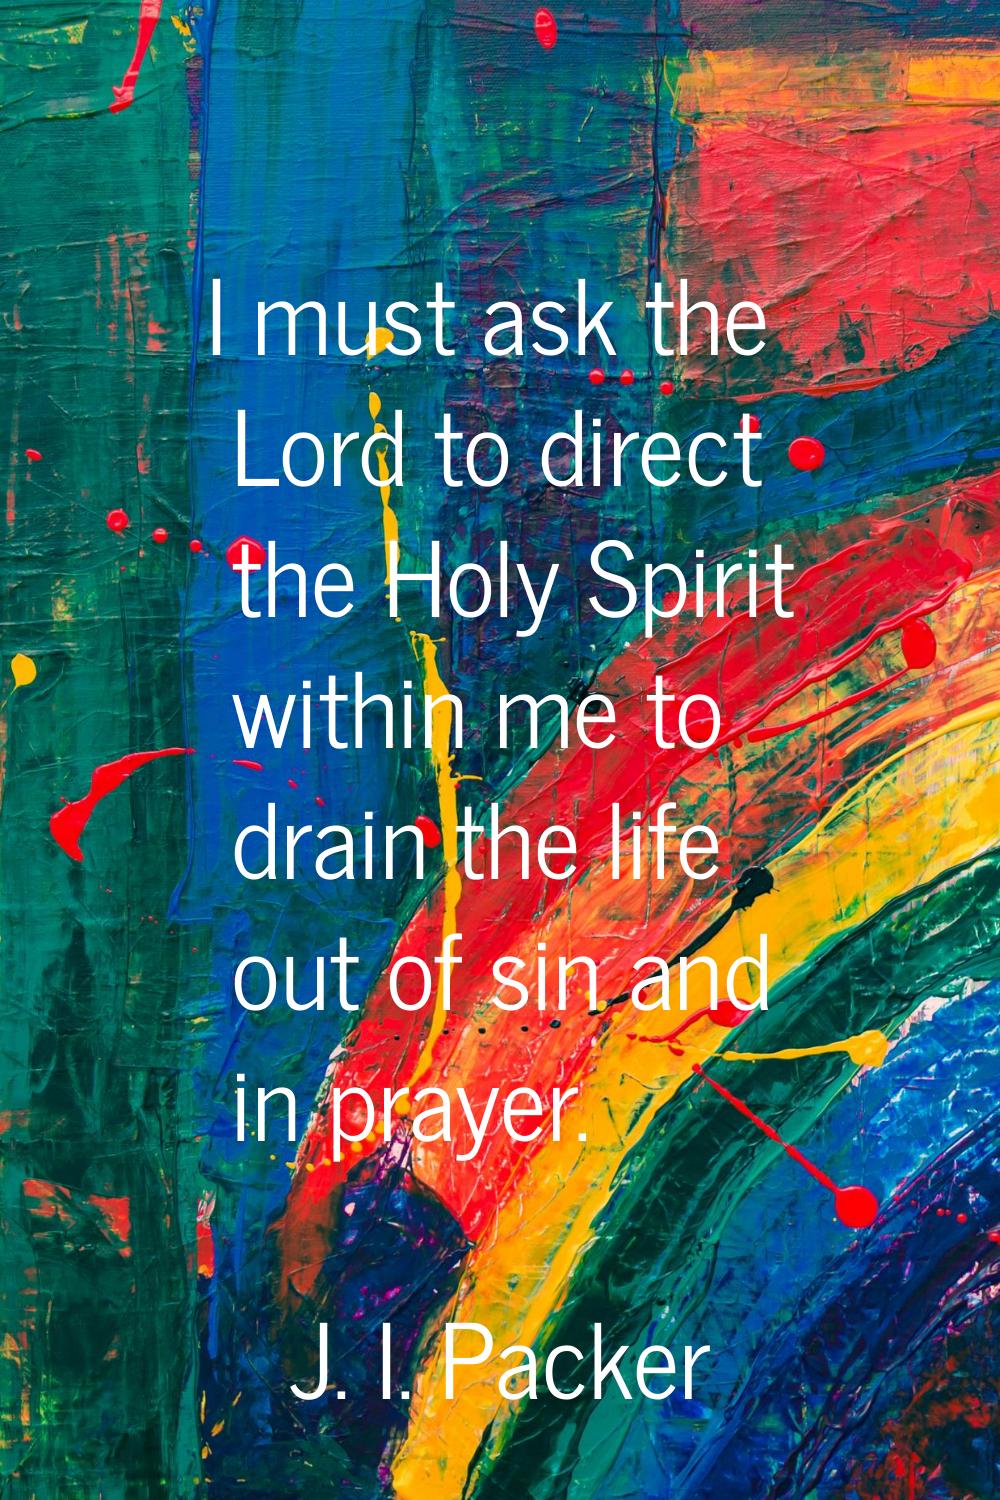 I must ask the Lord to direct the Holy Spirit within me to drain the life out of sin and in prayer.